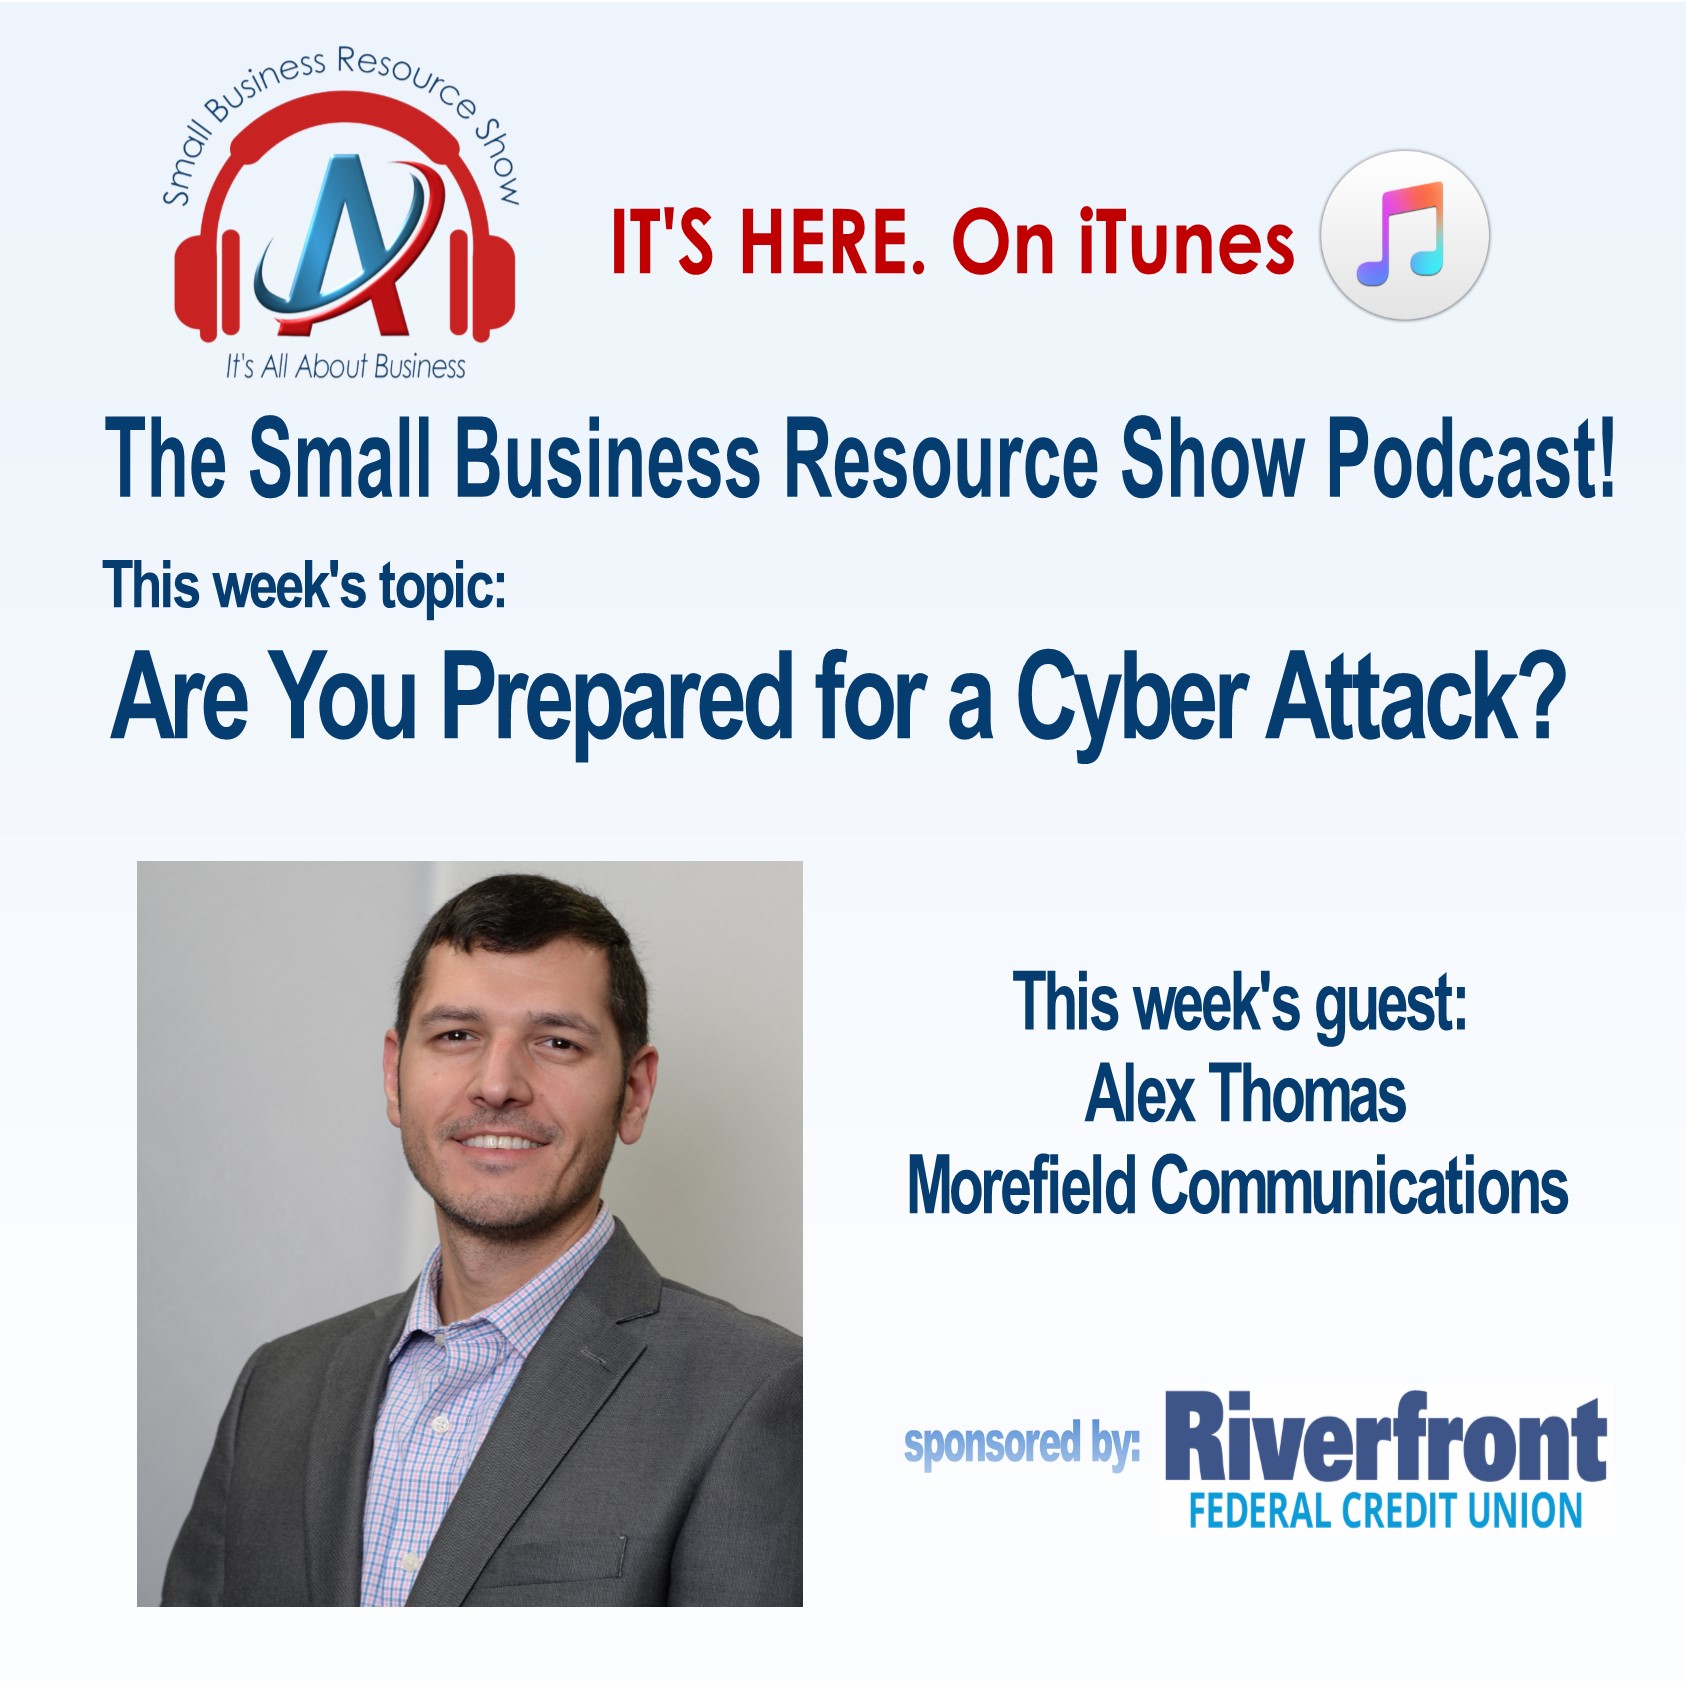 http://sbrashow.libsyn.com/are-you-prepared-for-a-cyber-attack-with-alex-thomas